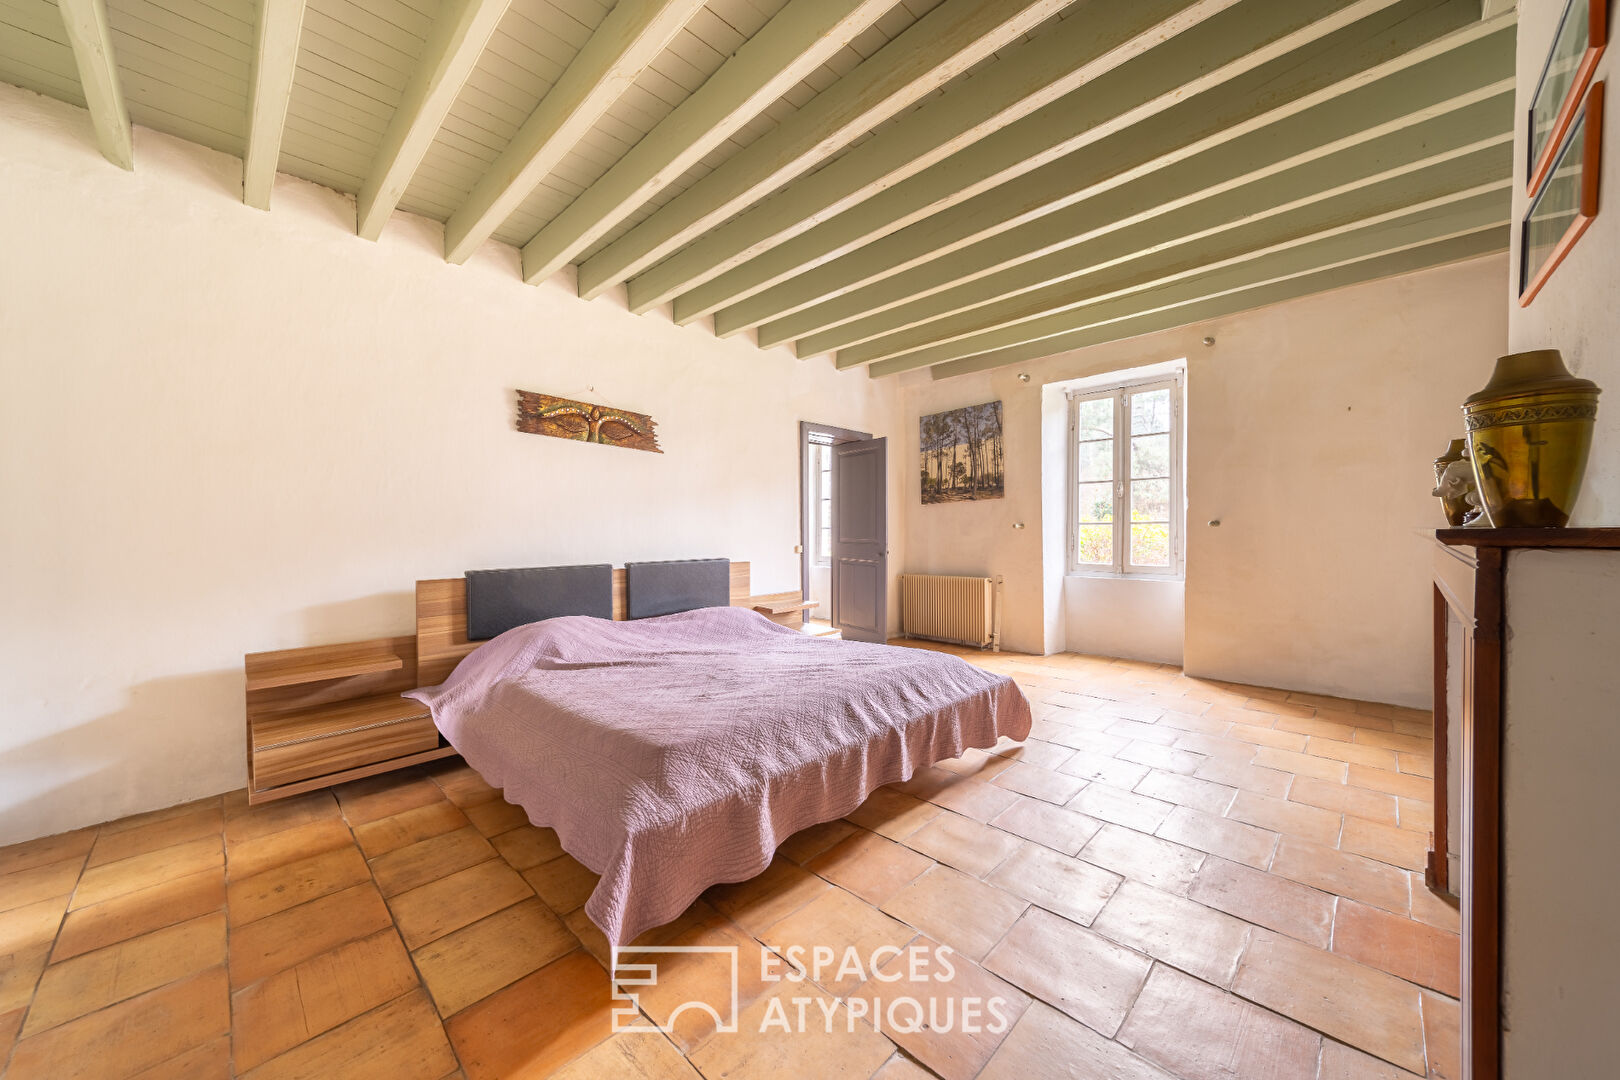 Charming bourgeois house in the heart of Saugnac-et-Muret